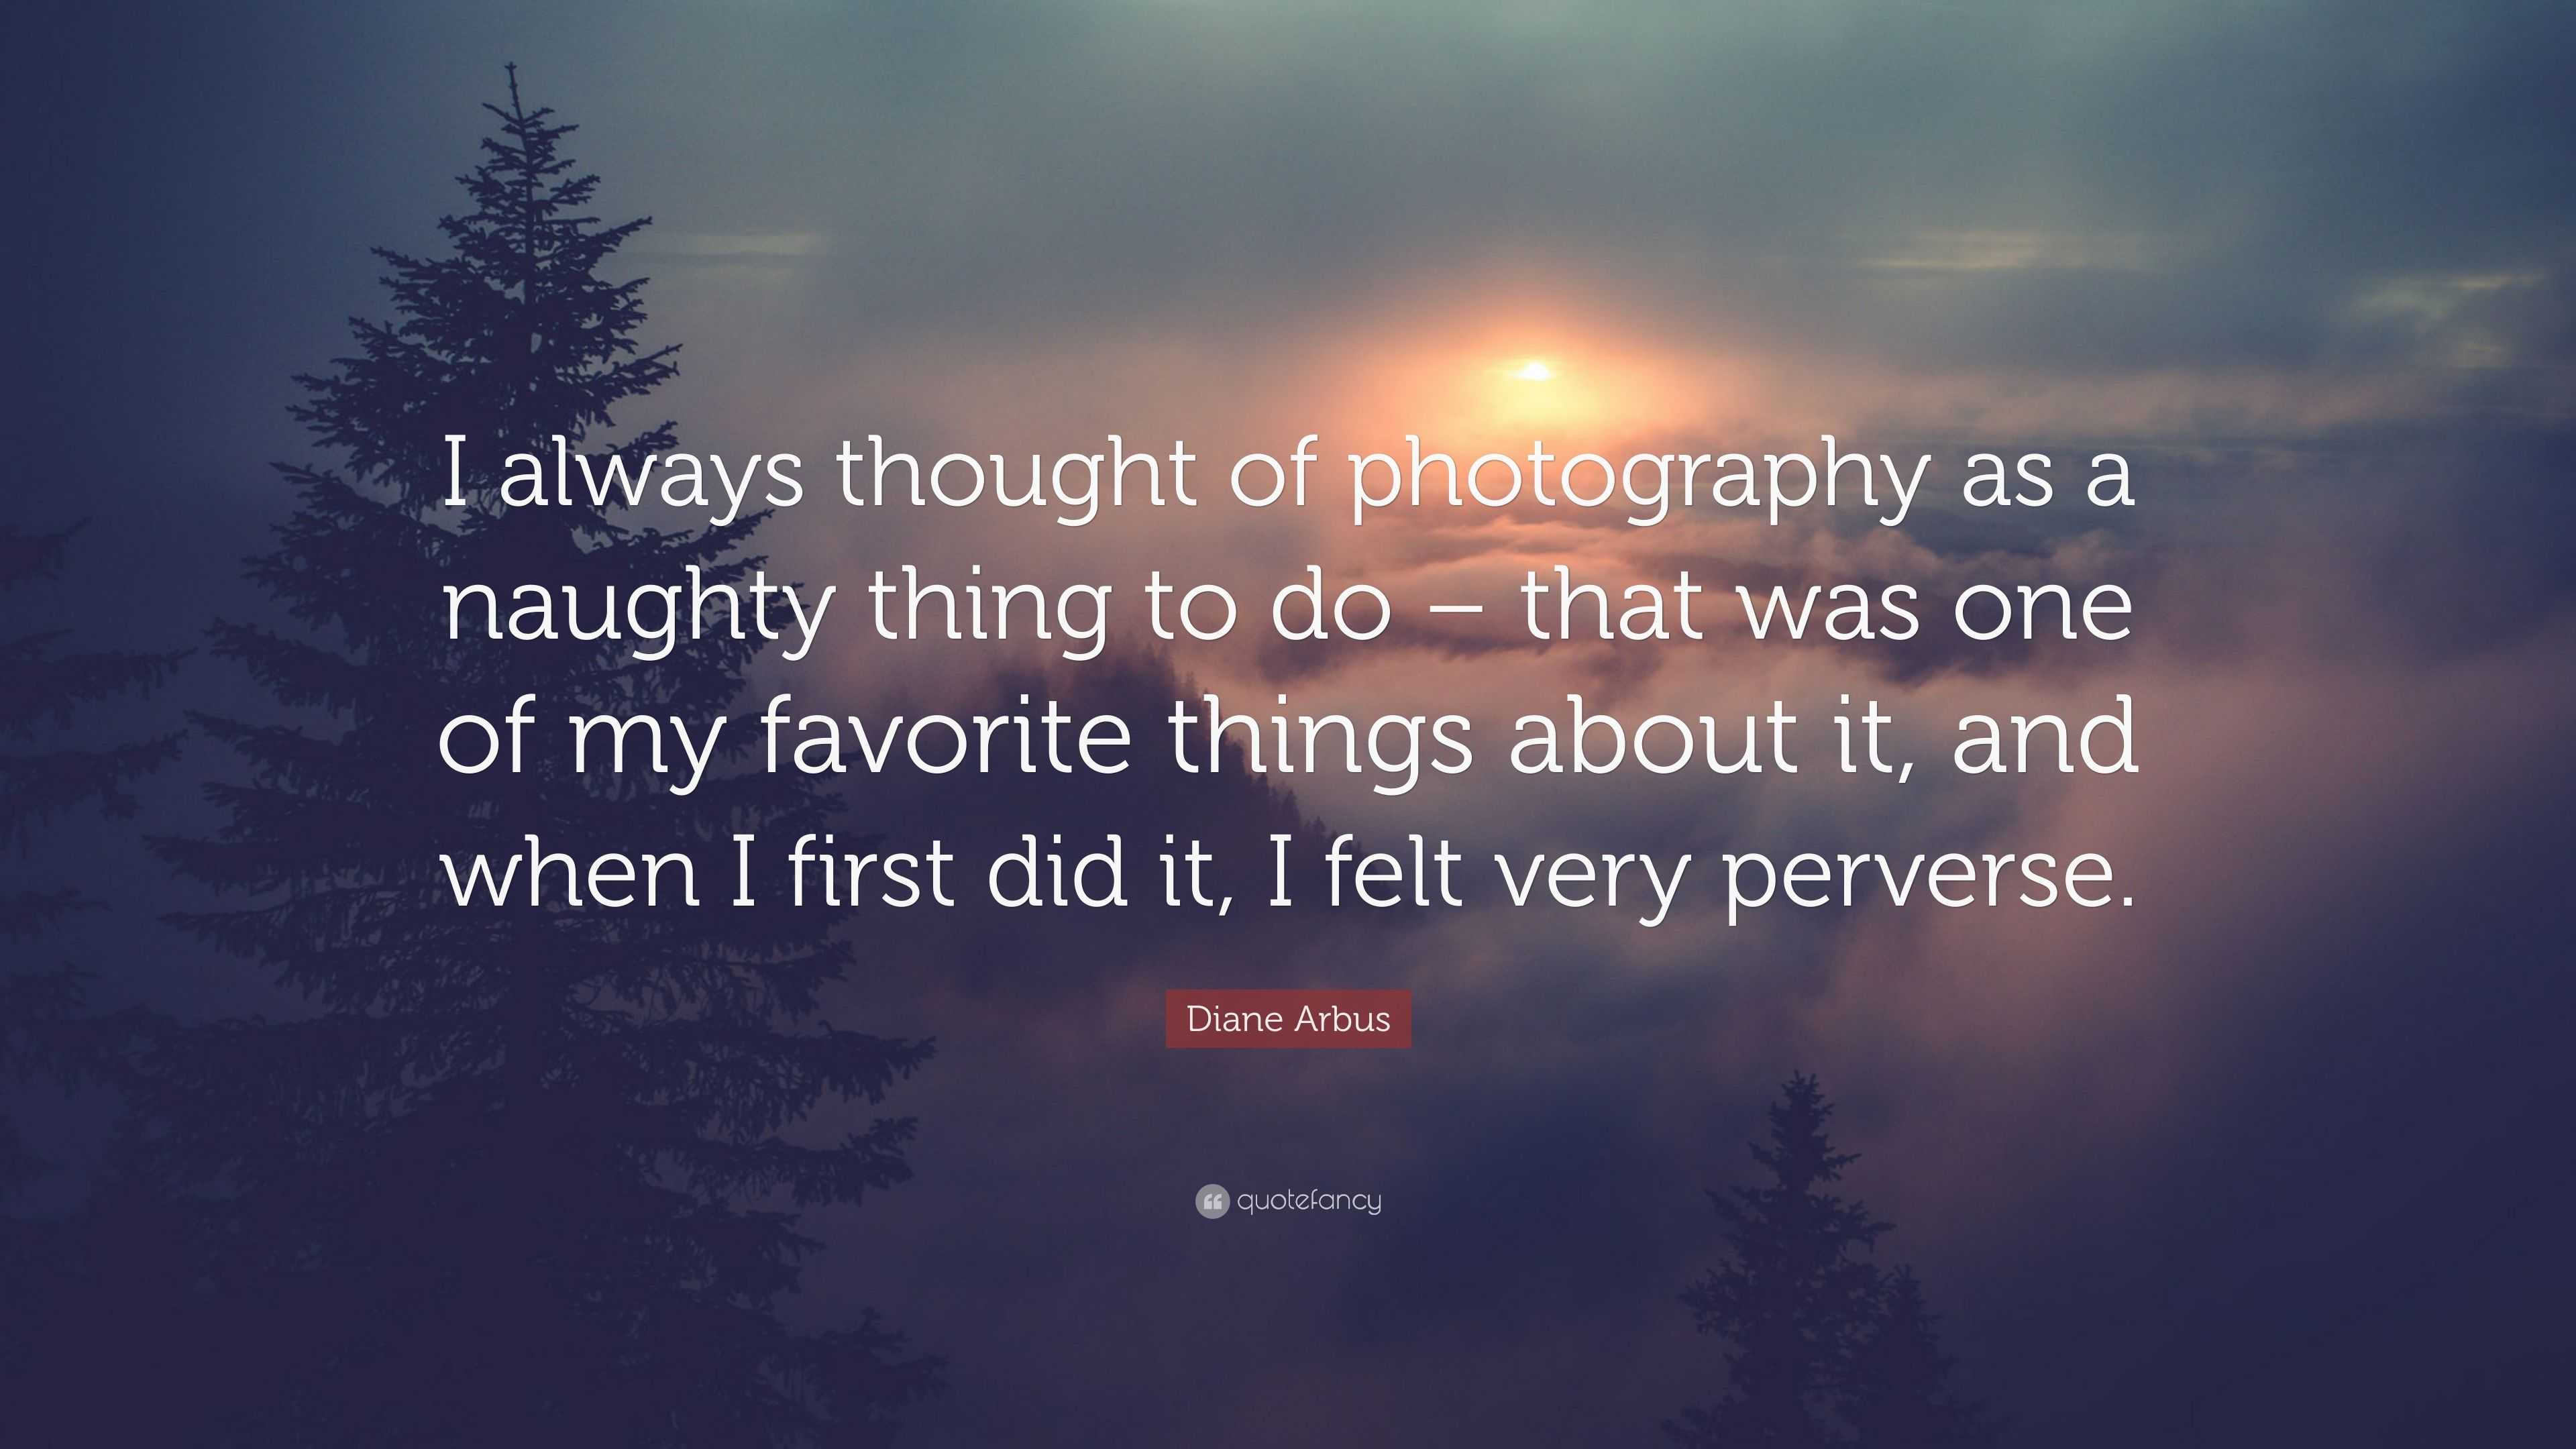 https://quotefancy.com/media/wallpaper/3840x2160/4843659-Diane-Arbus-Quote-I-always-thought-of-photography-as-a-naughty.jpg